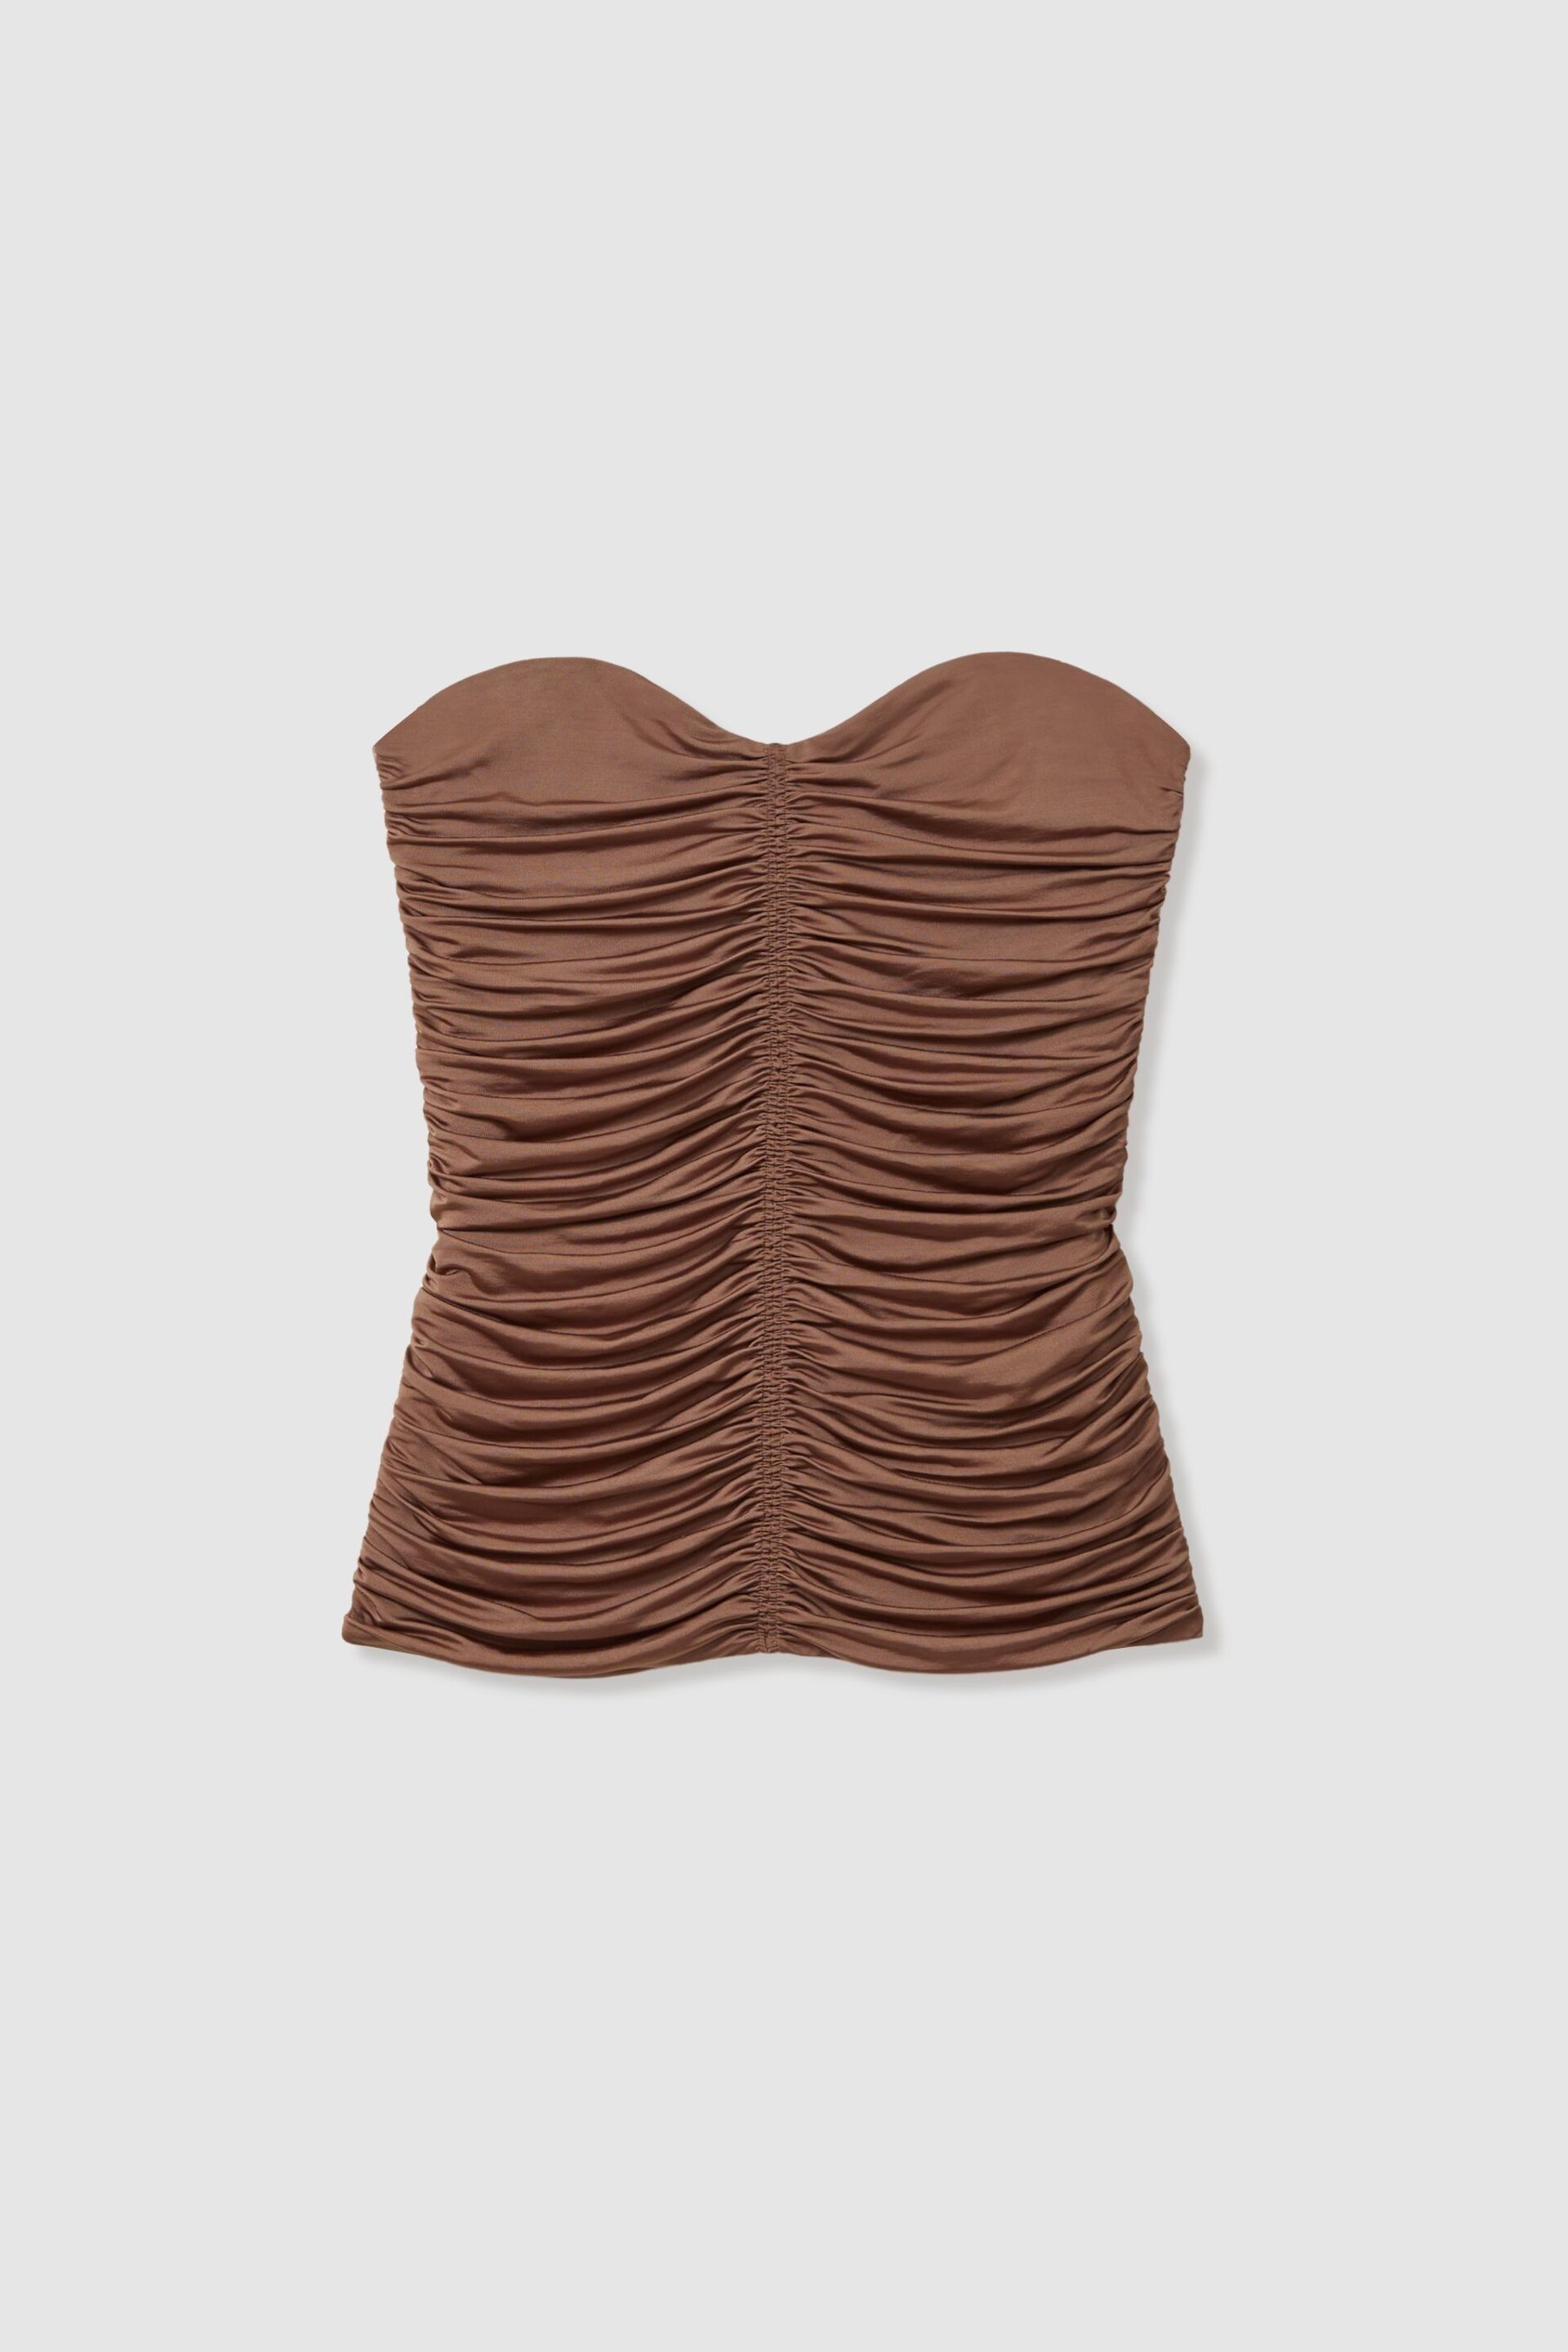 Reiss Mink Marina Ruched Strapless Tube Top - Image 2 of 5